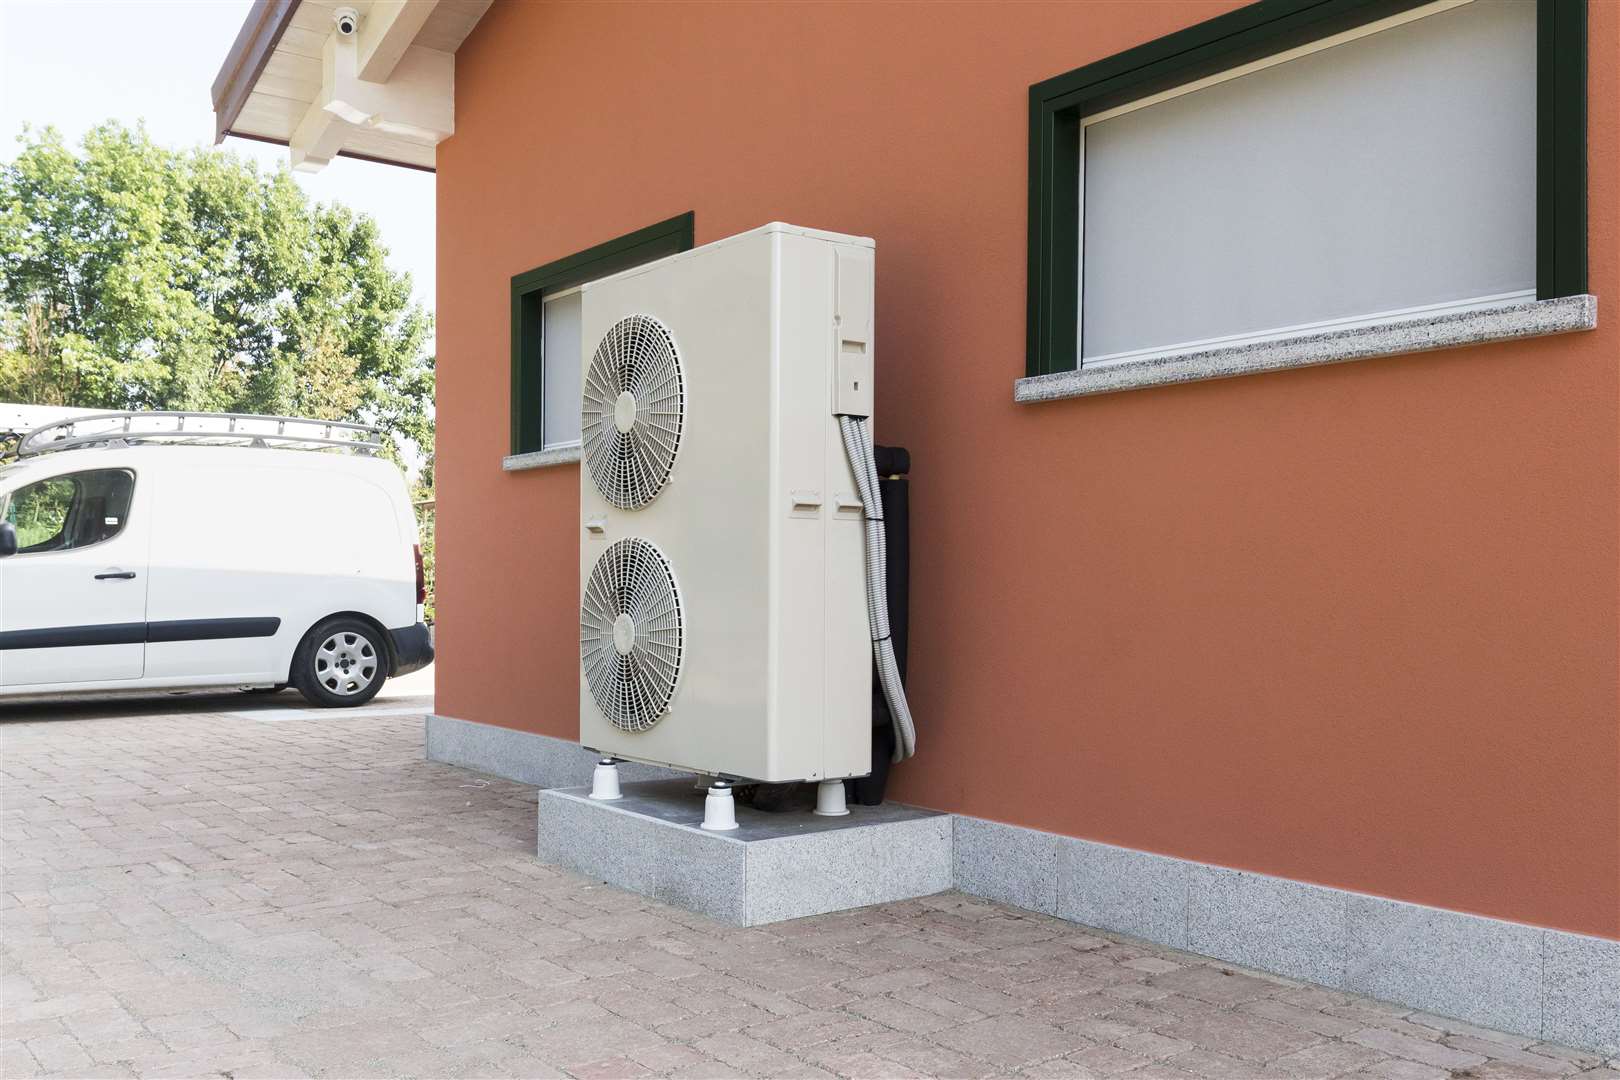 Heat pumps offer one solution to heating a home without using fossil fuels.